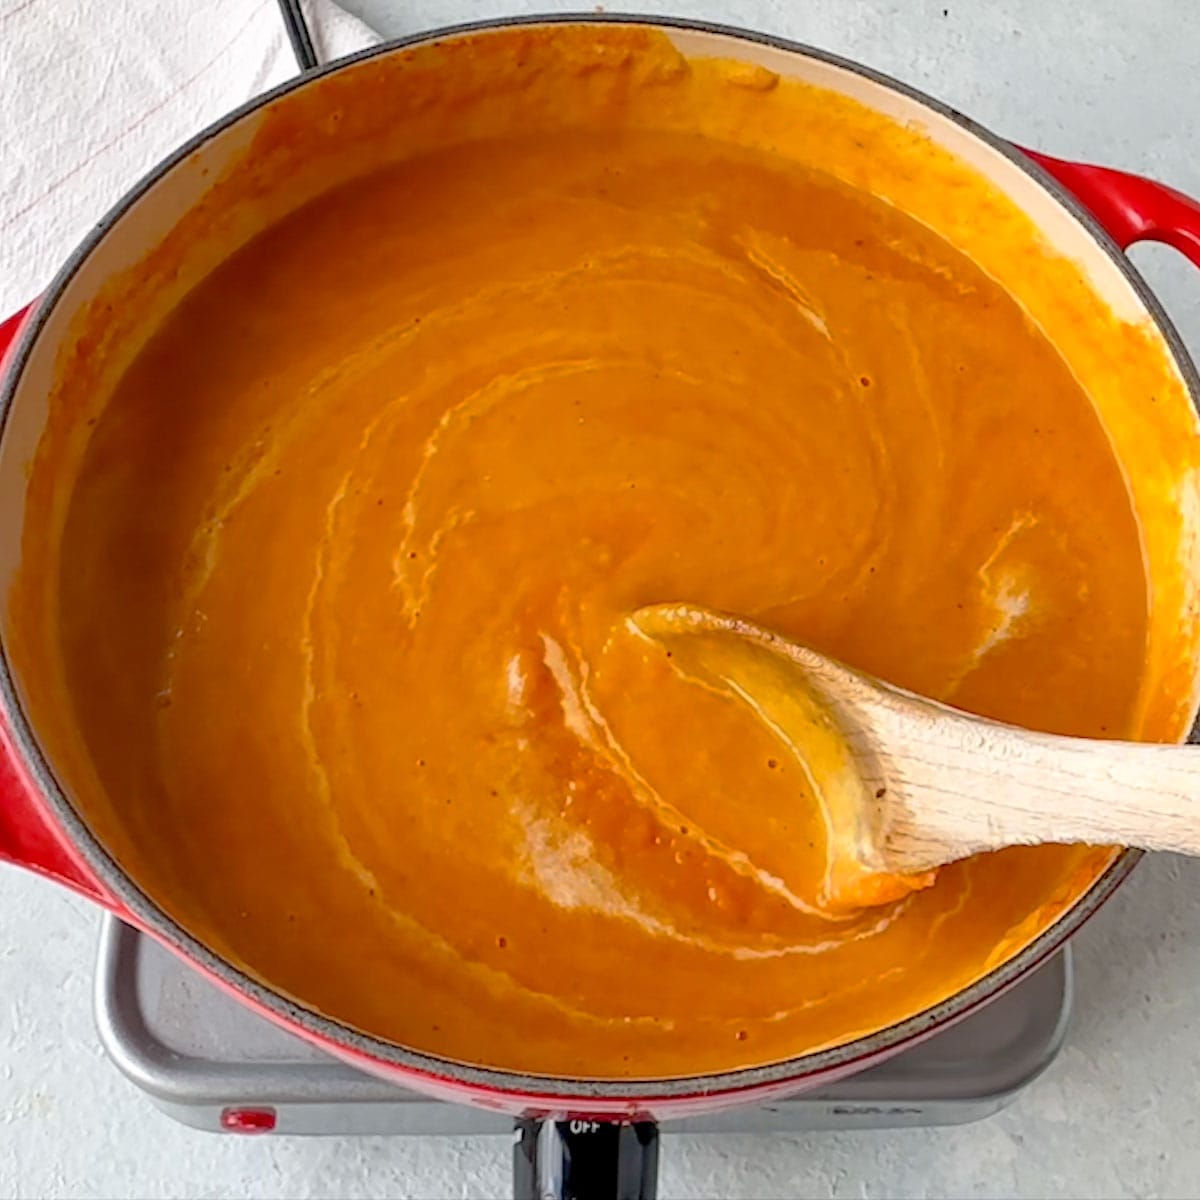 Pumpkin Carrot Soup in hot pan ready to serve just before garnishing